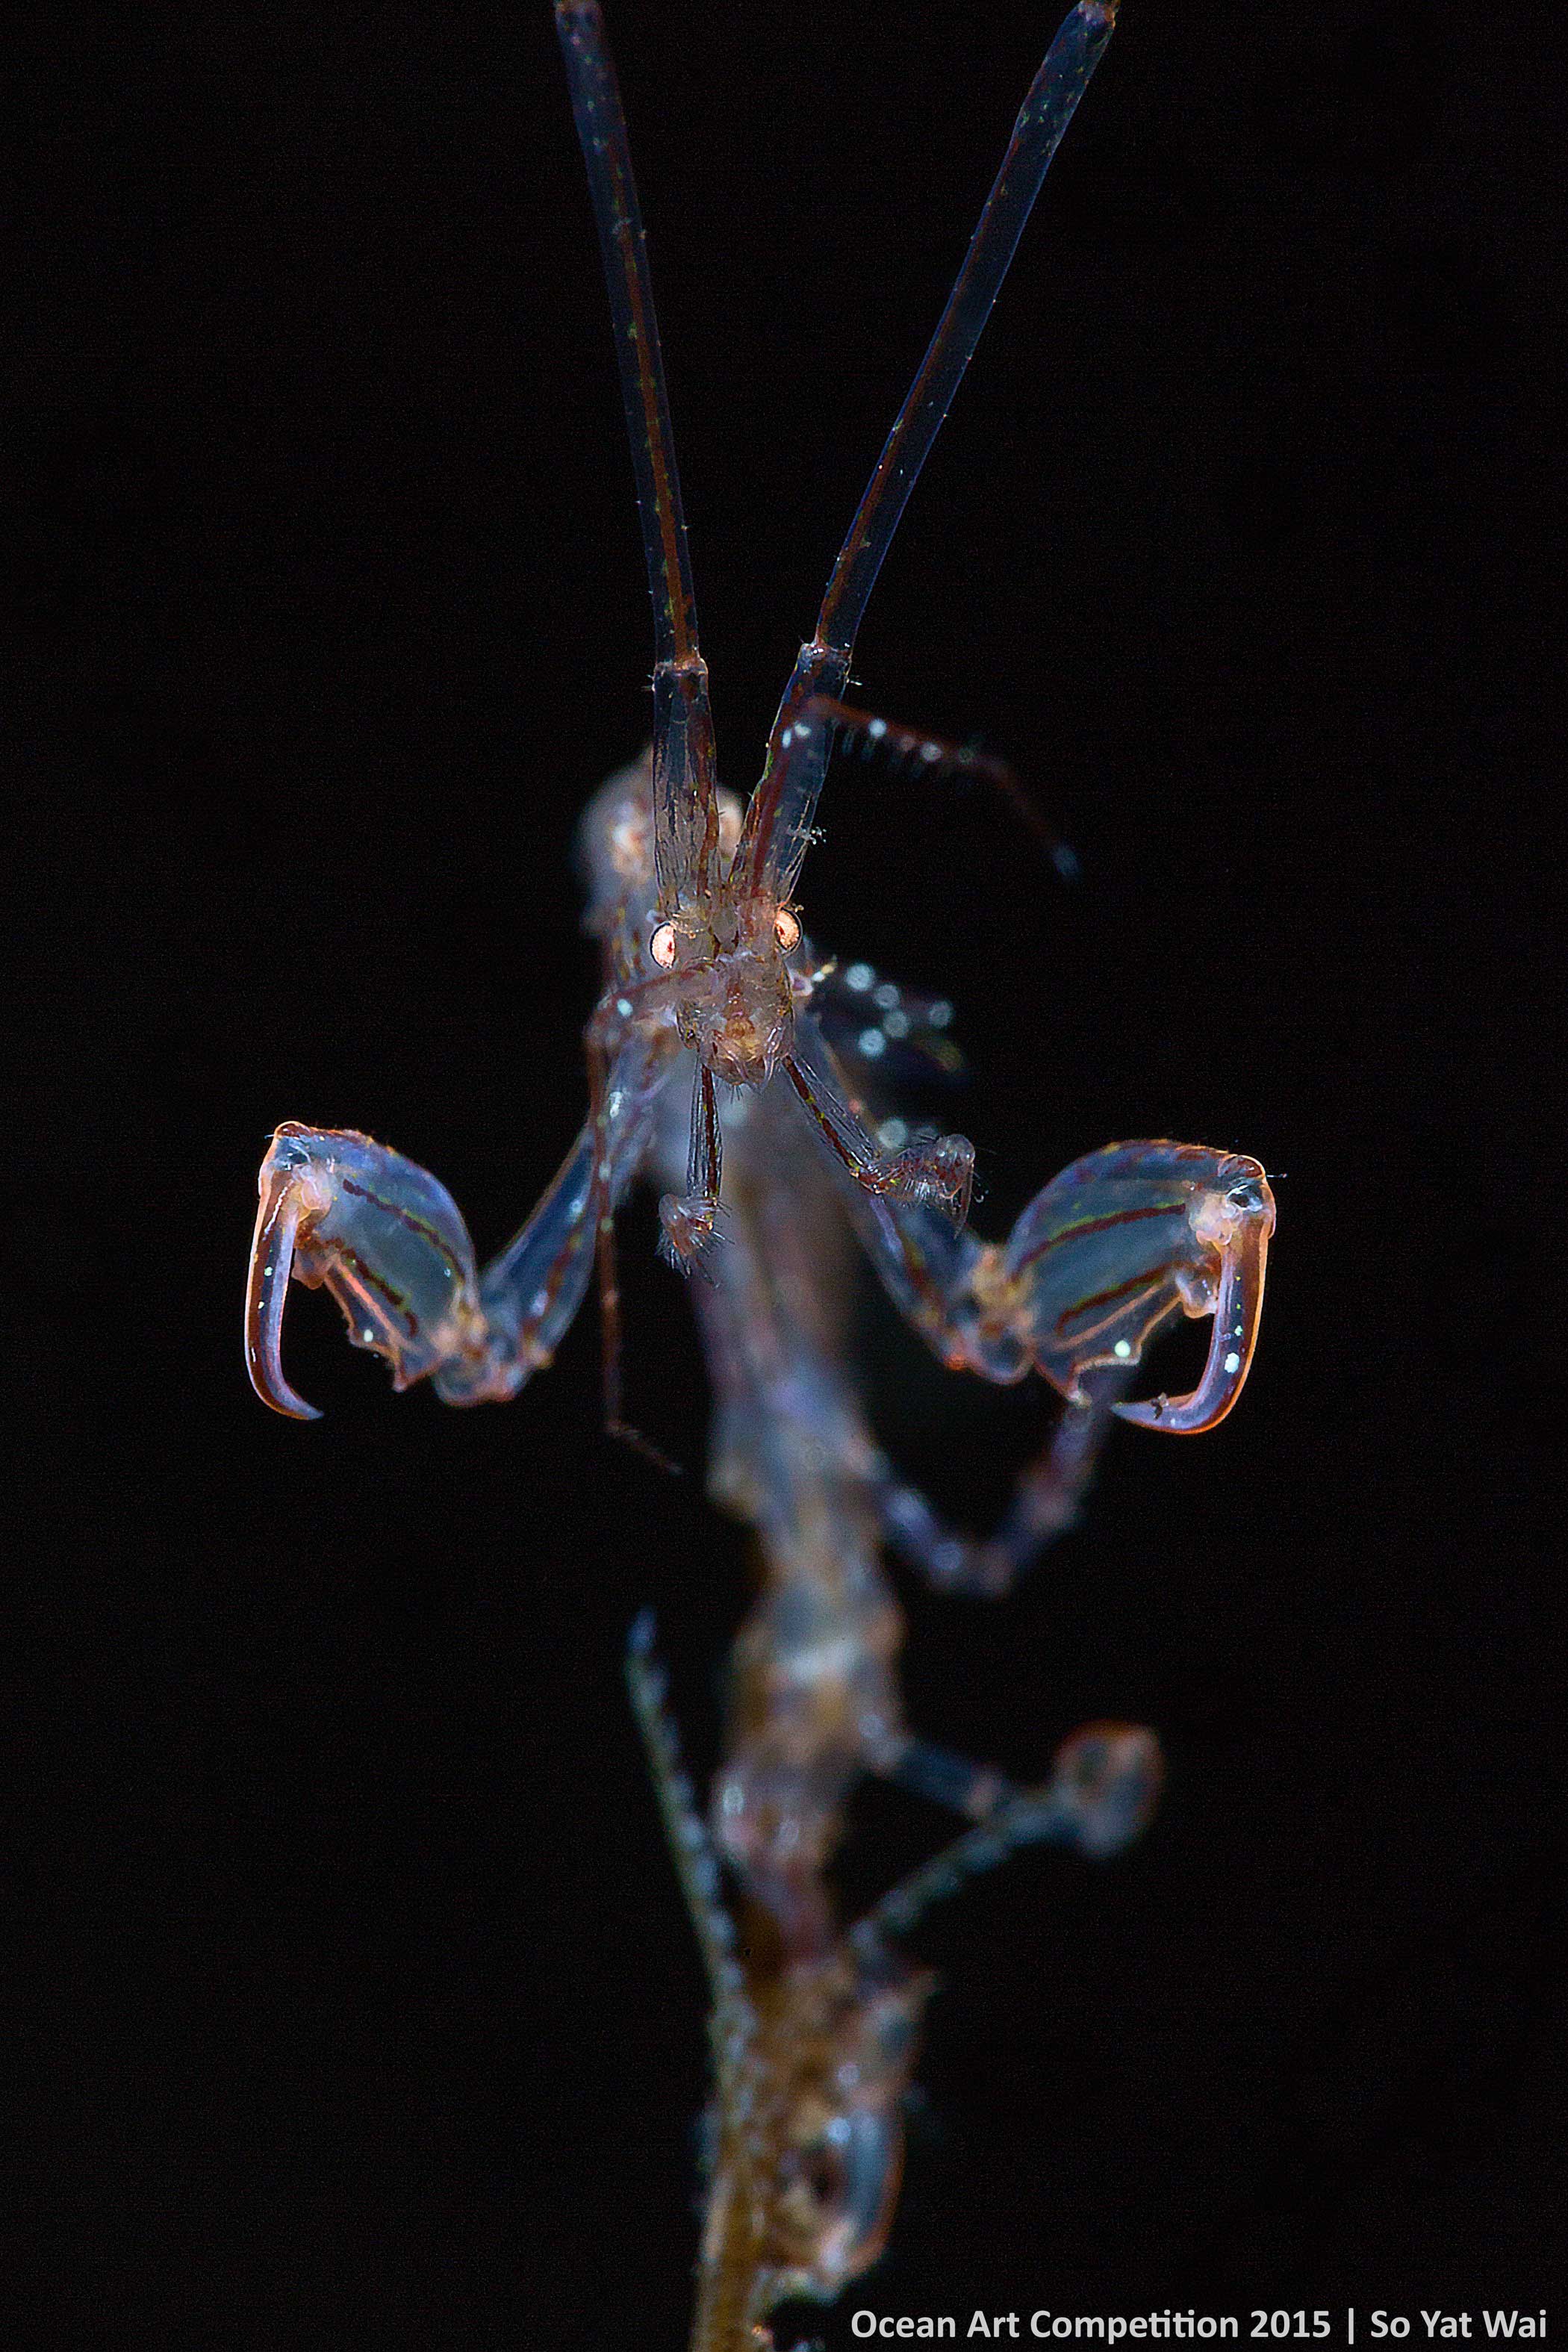 The story: Owing to the shallow depth of field of super macro photography, it is hard to get both claws, face and tentacles in focus. Therefore i had kept shooting when I feel all these target points nearly rest in same focal plane. I have took around 60 shoots in order to get the skeleton shrimp stay in the centre of the frame and all target points in sharp focus.